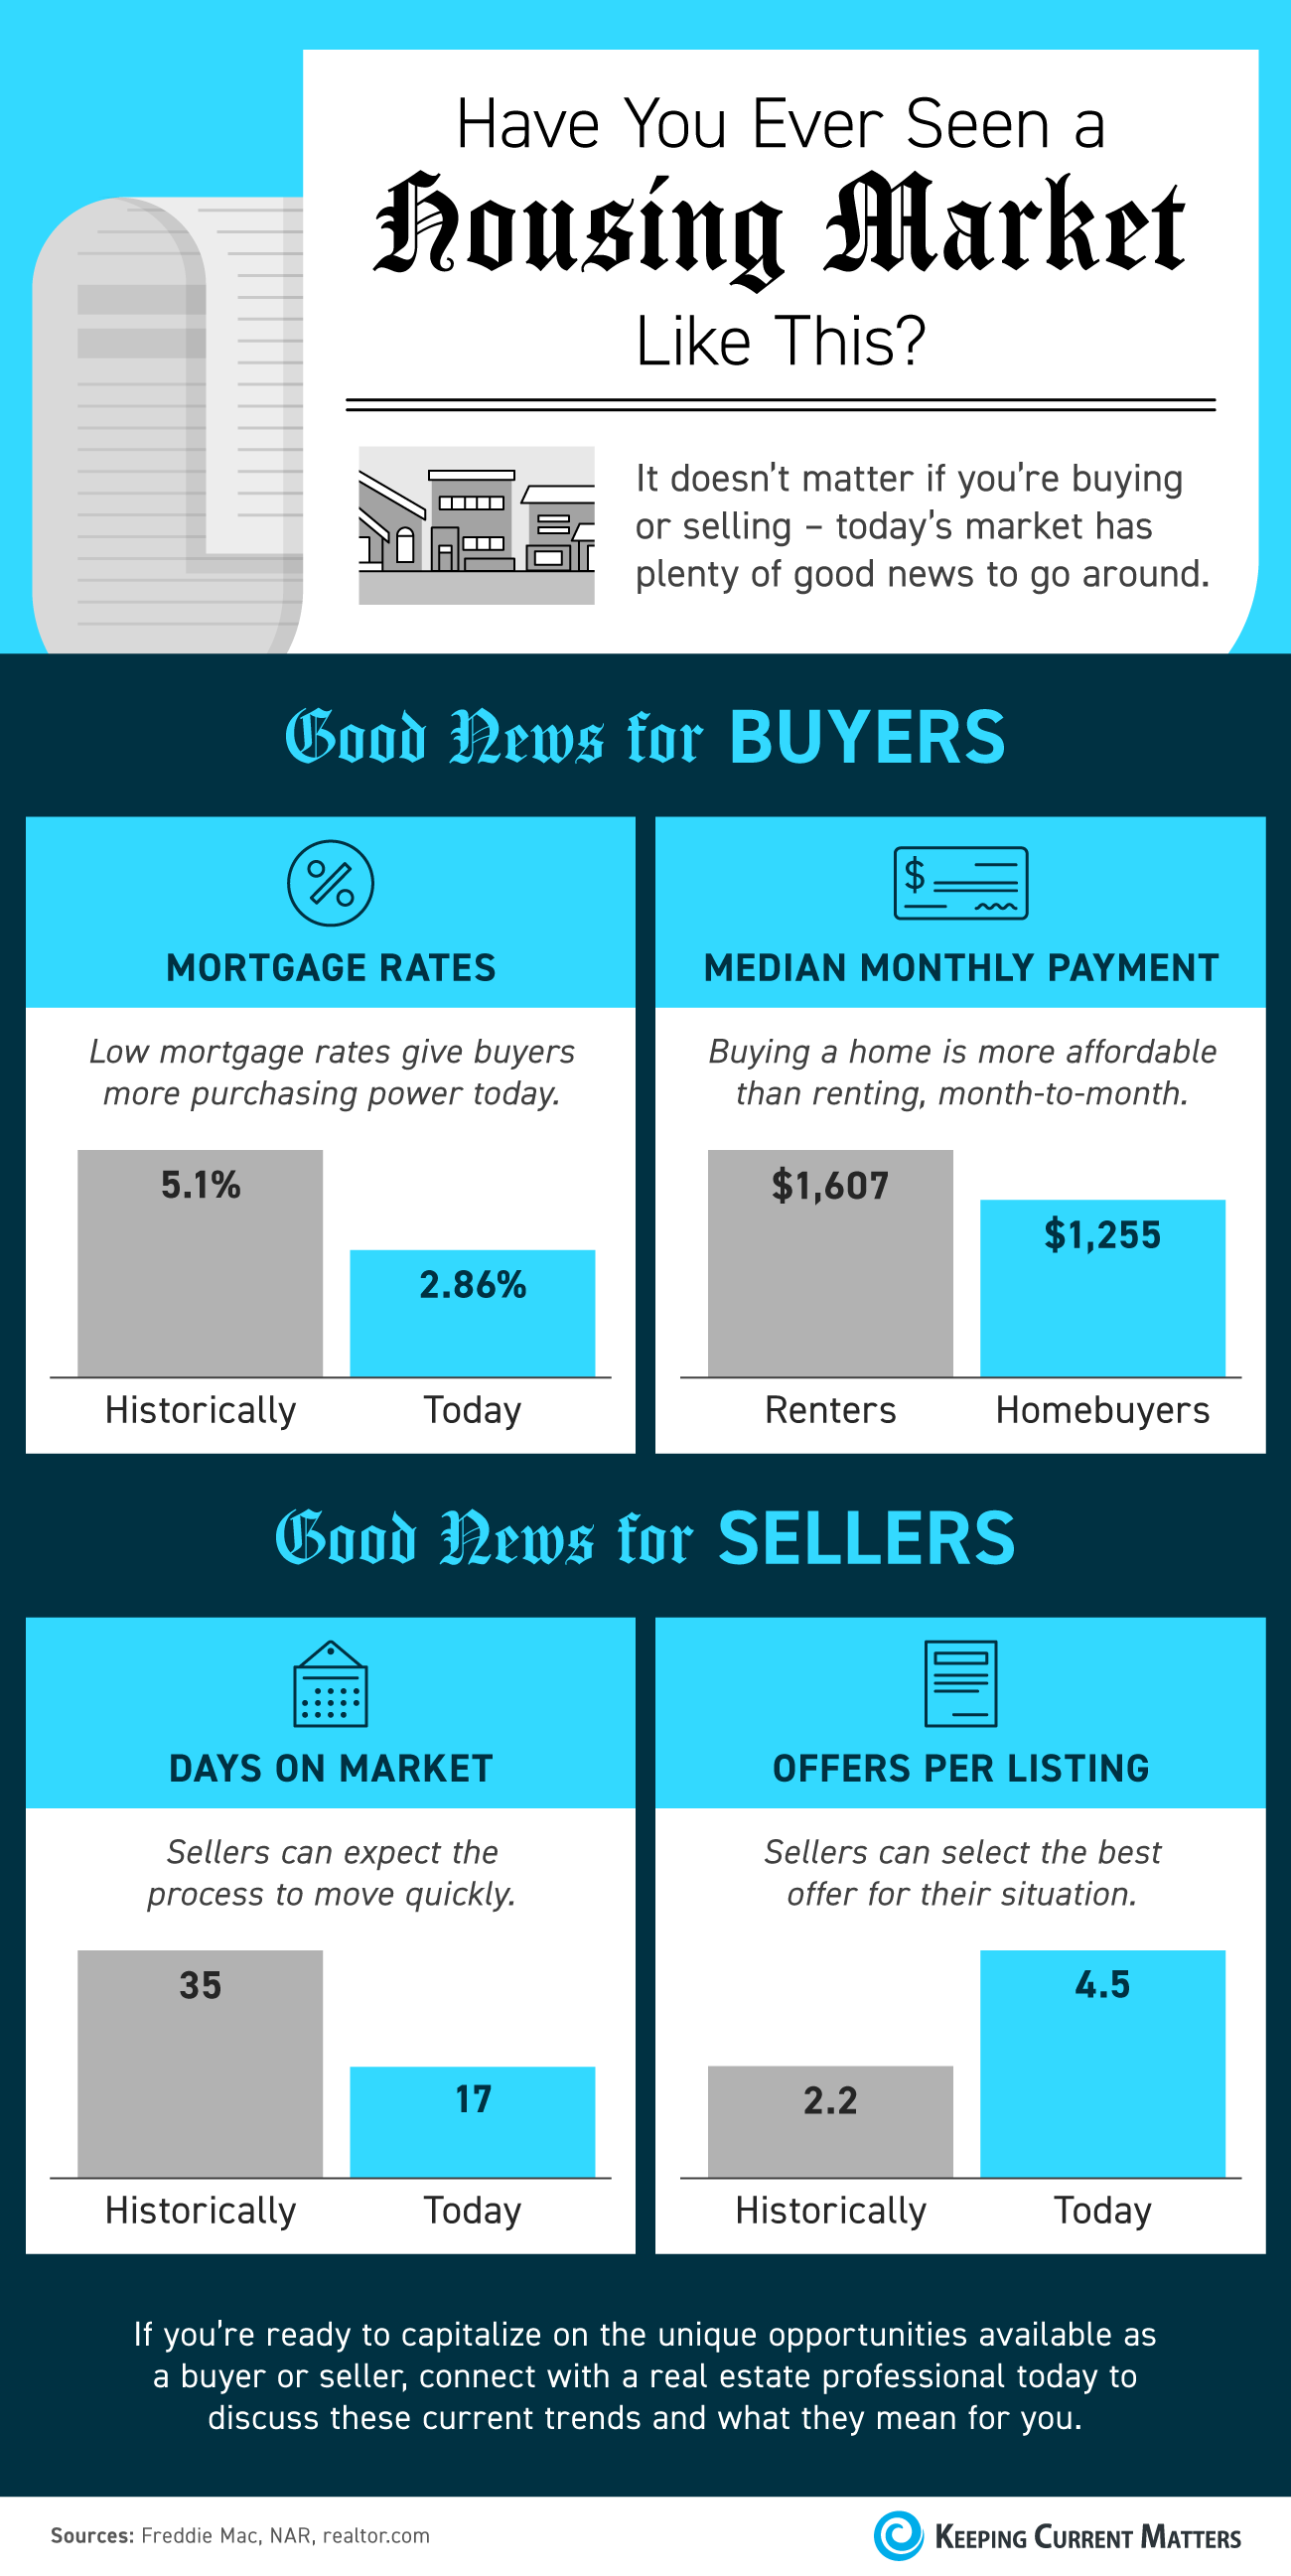 Have You Ever Seen a Housing Market Like This? [INFOGRAPHIC] | Keeping Current Matters